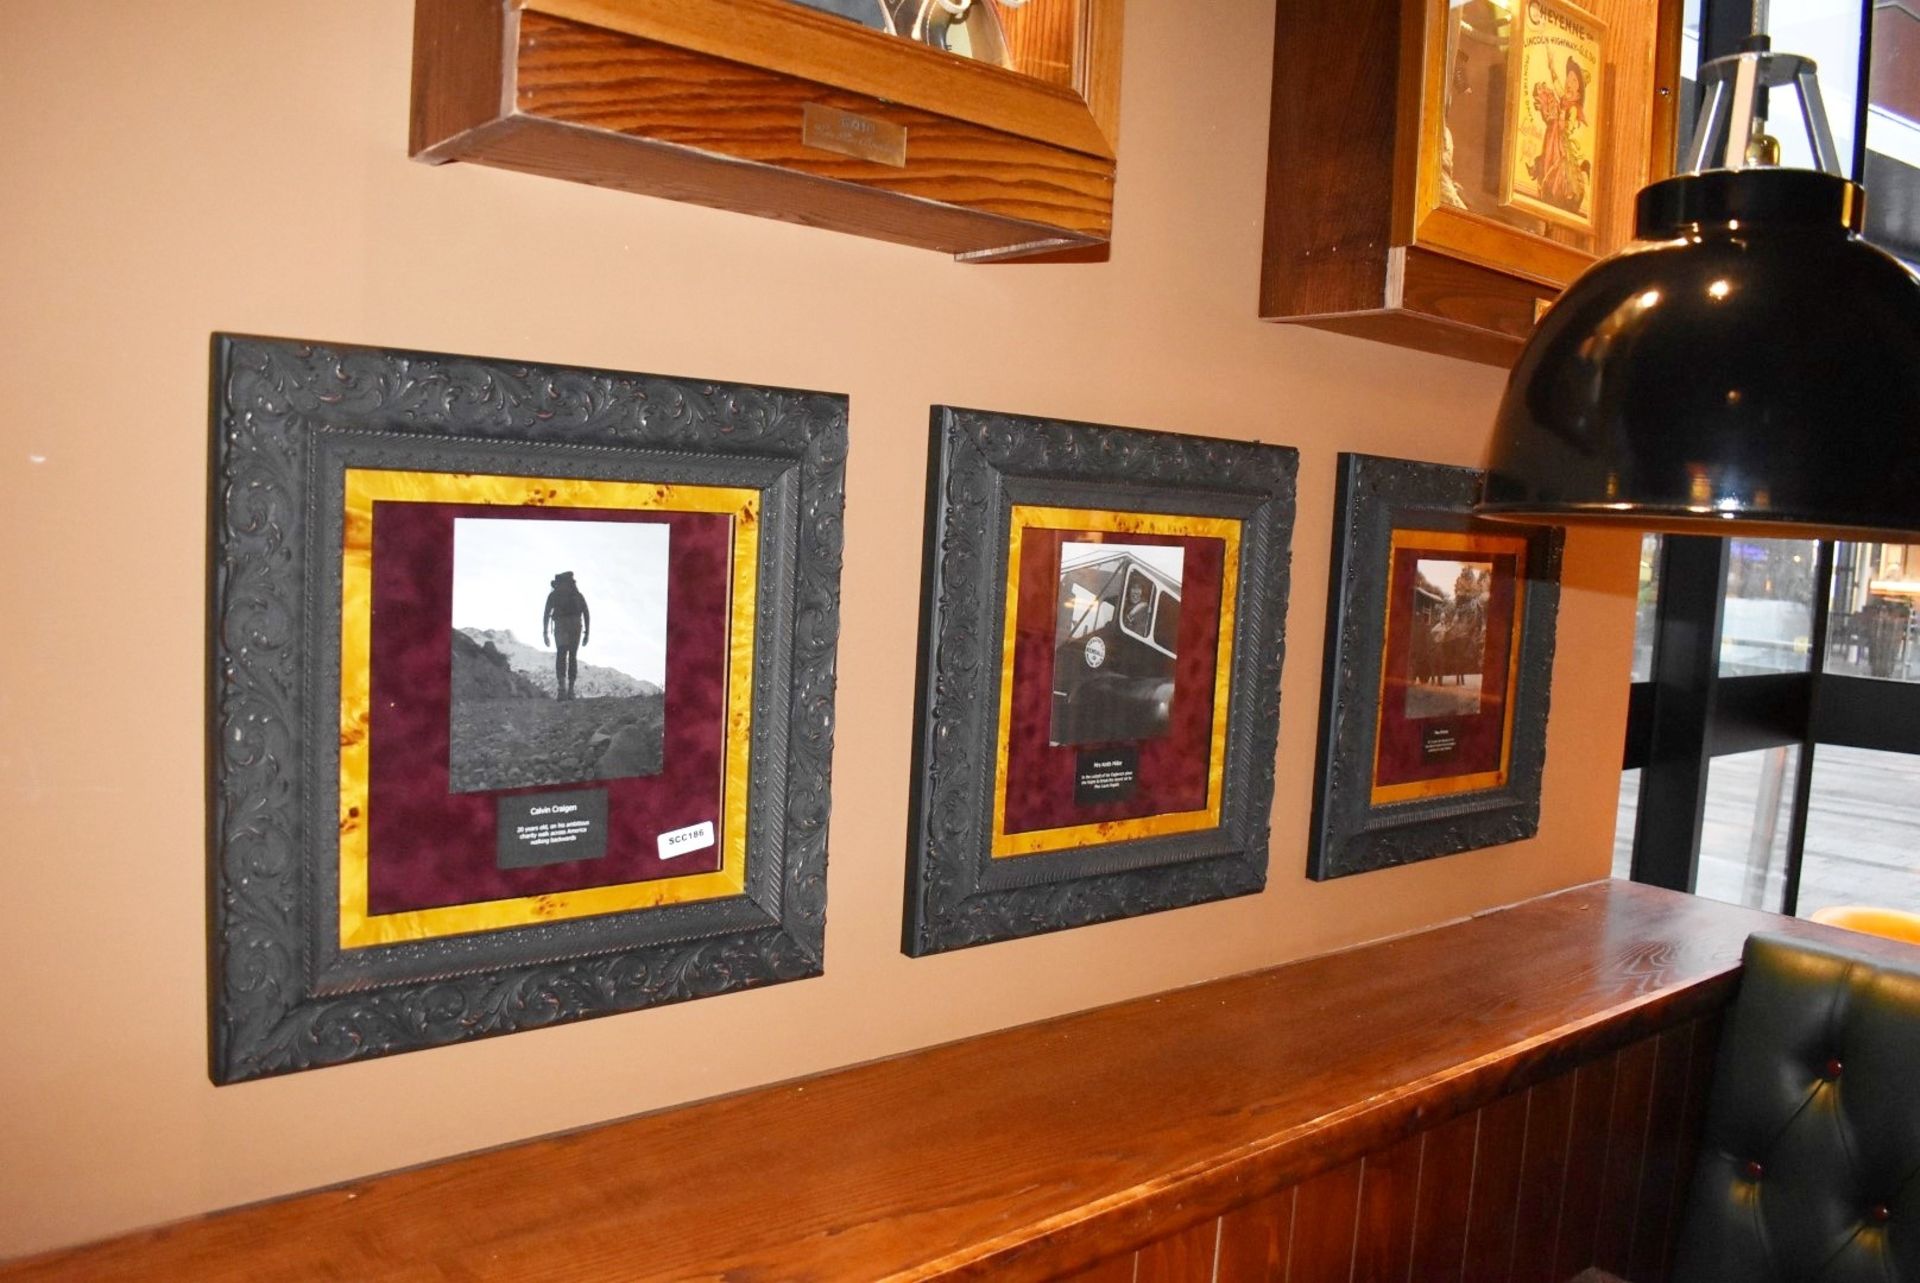 3 x Wall Pictures Depicting Historical American Adventurers in Ornate Frames - Size: 50 x 50 cms